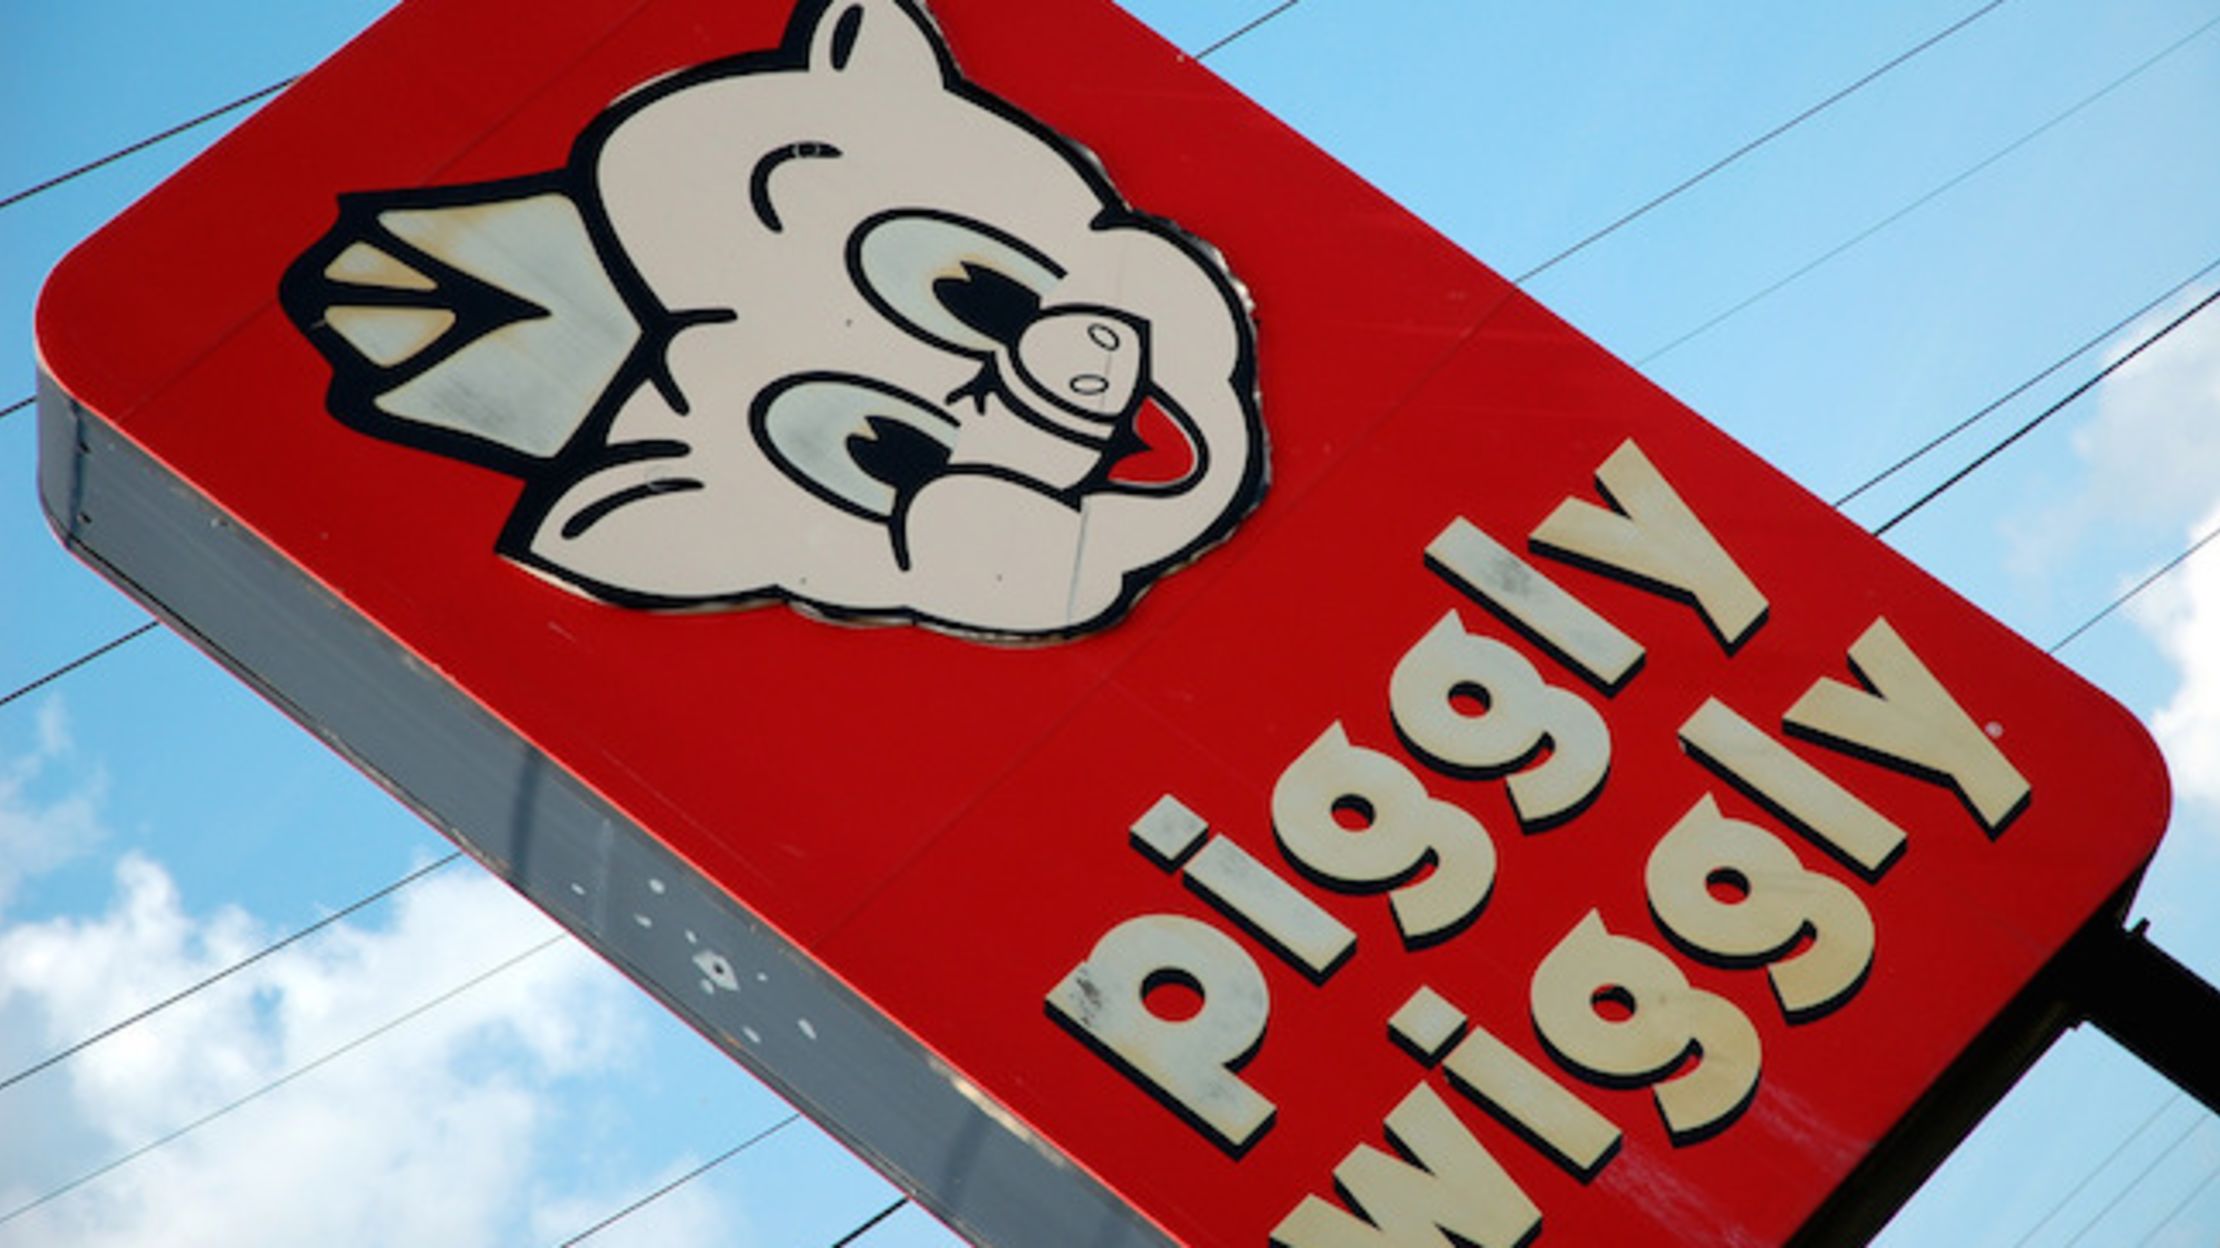 piggly wiggly jobs